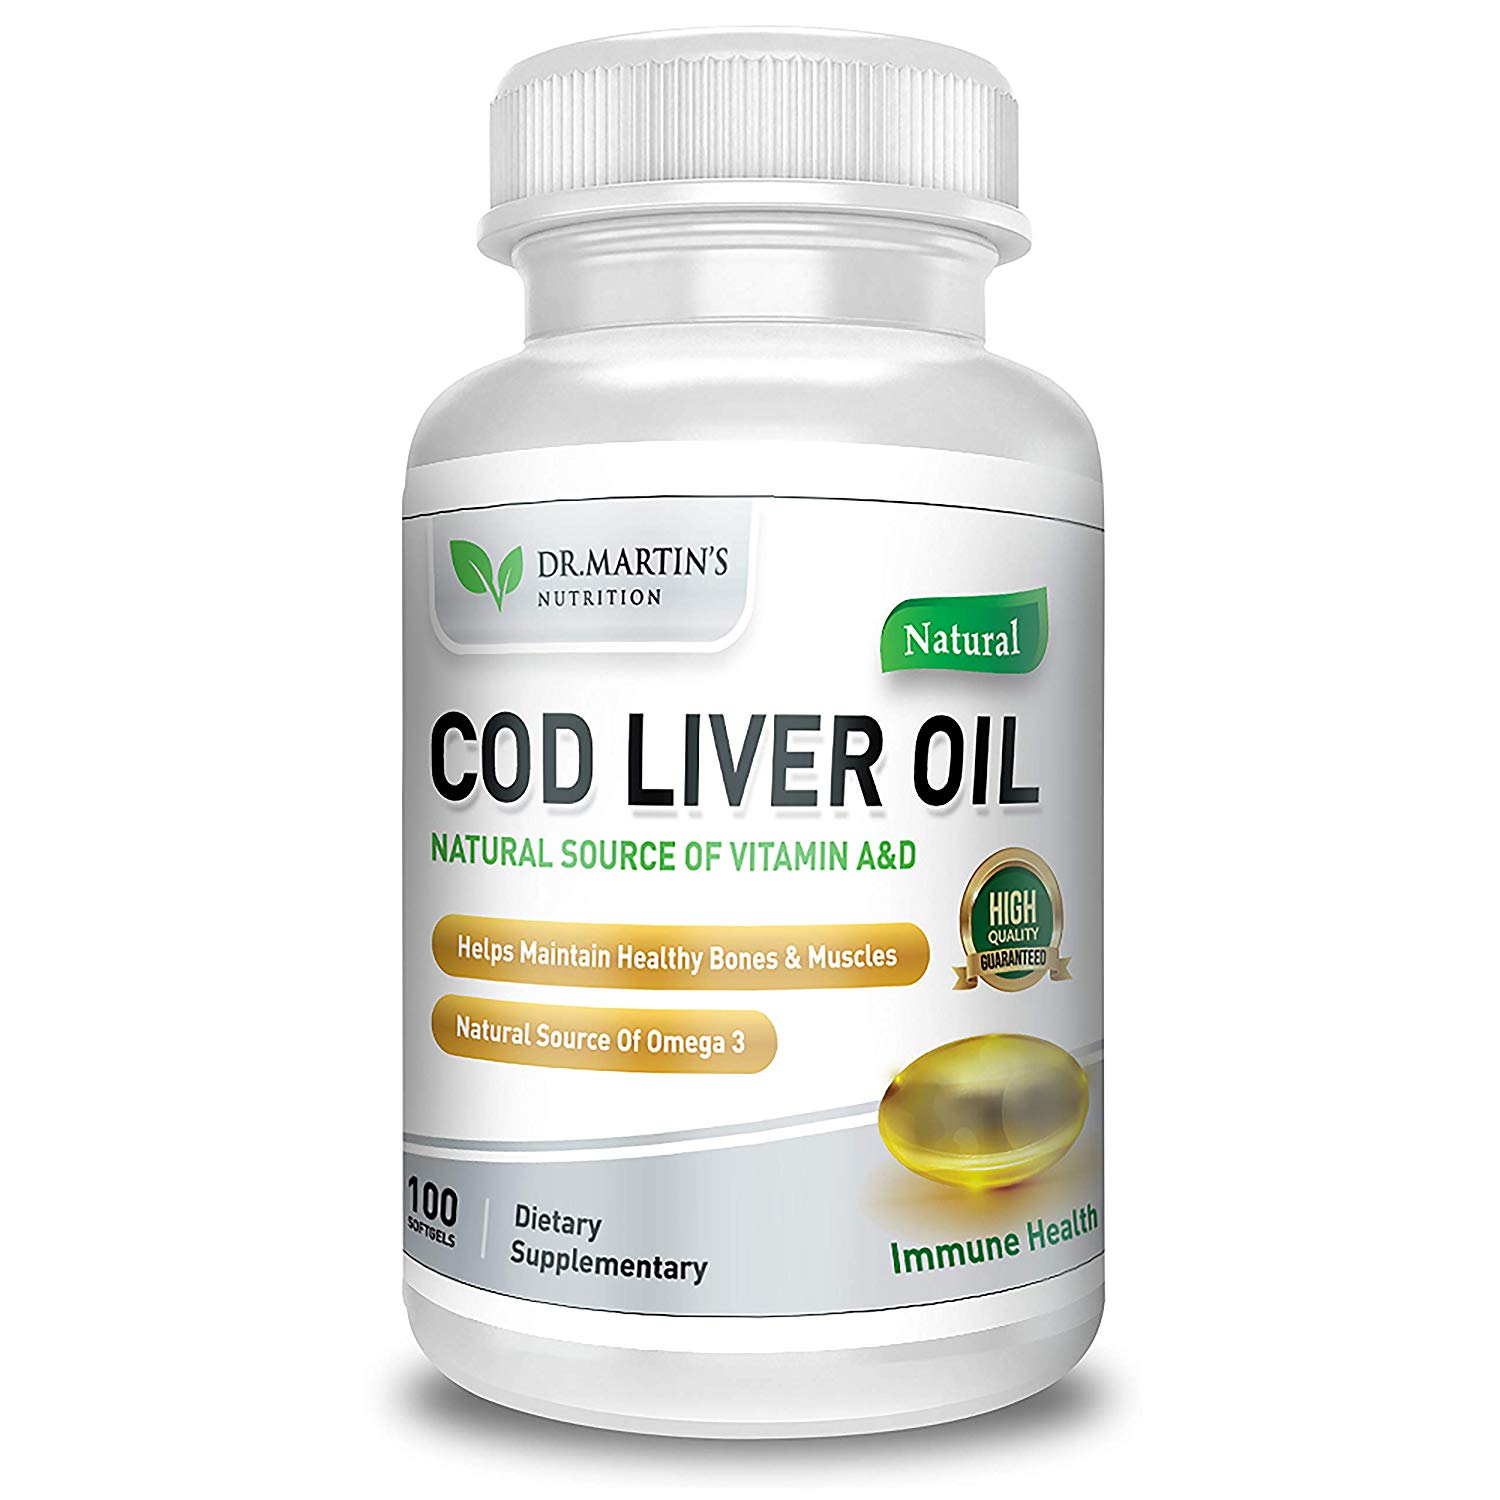 Dr. Martin’s COD LIVER OIL Natural Source Of Omega 3, Triple Strength  Best Immune Health, Healthy Bones & Muscles - USA